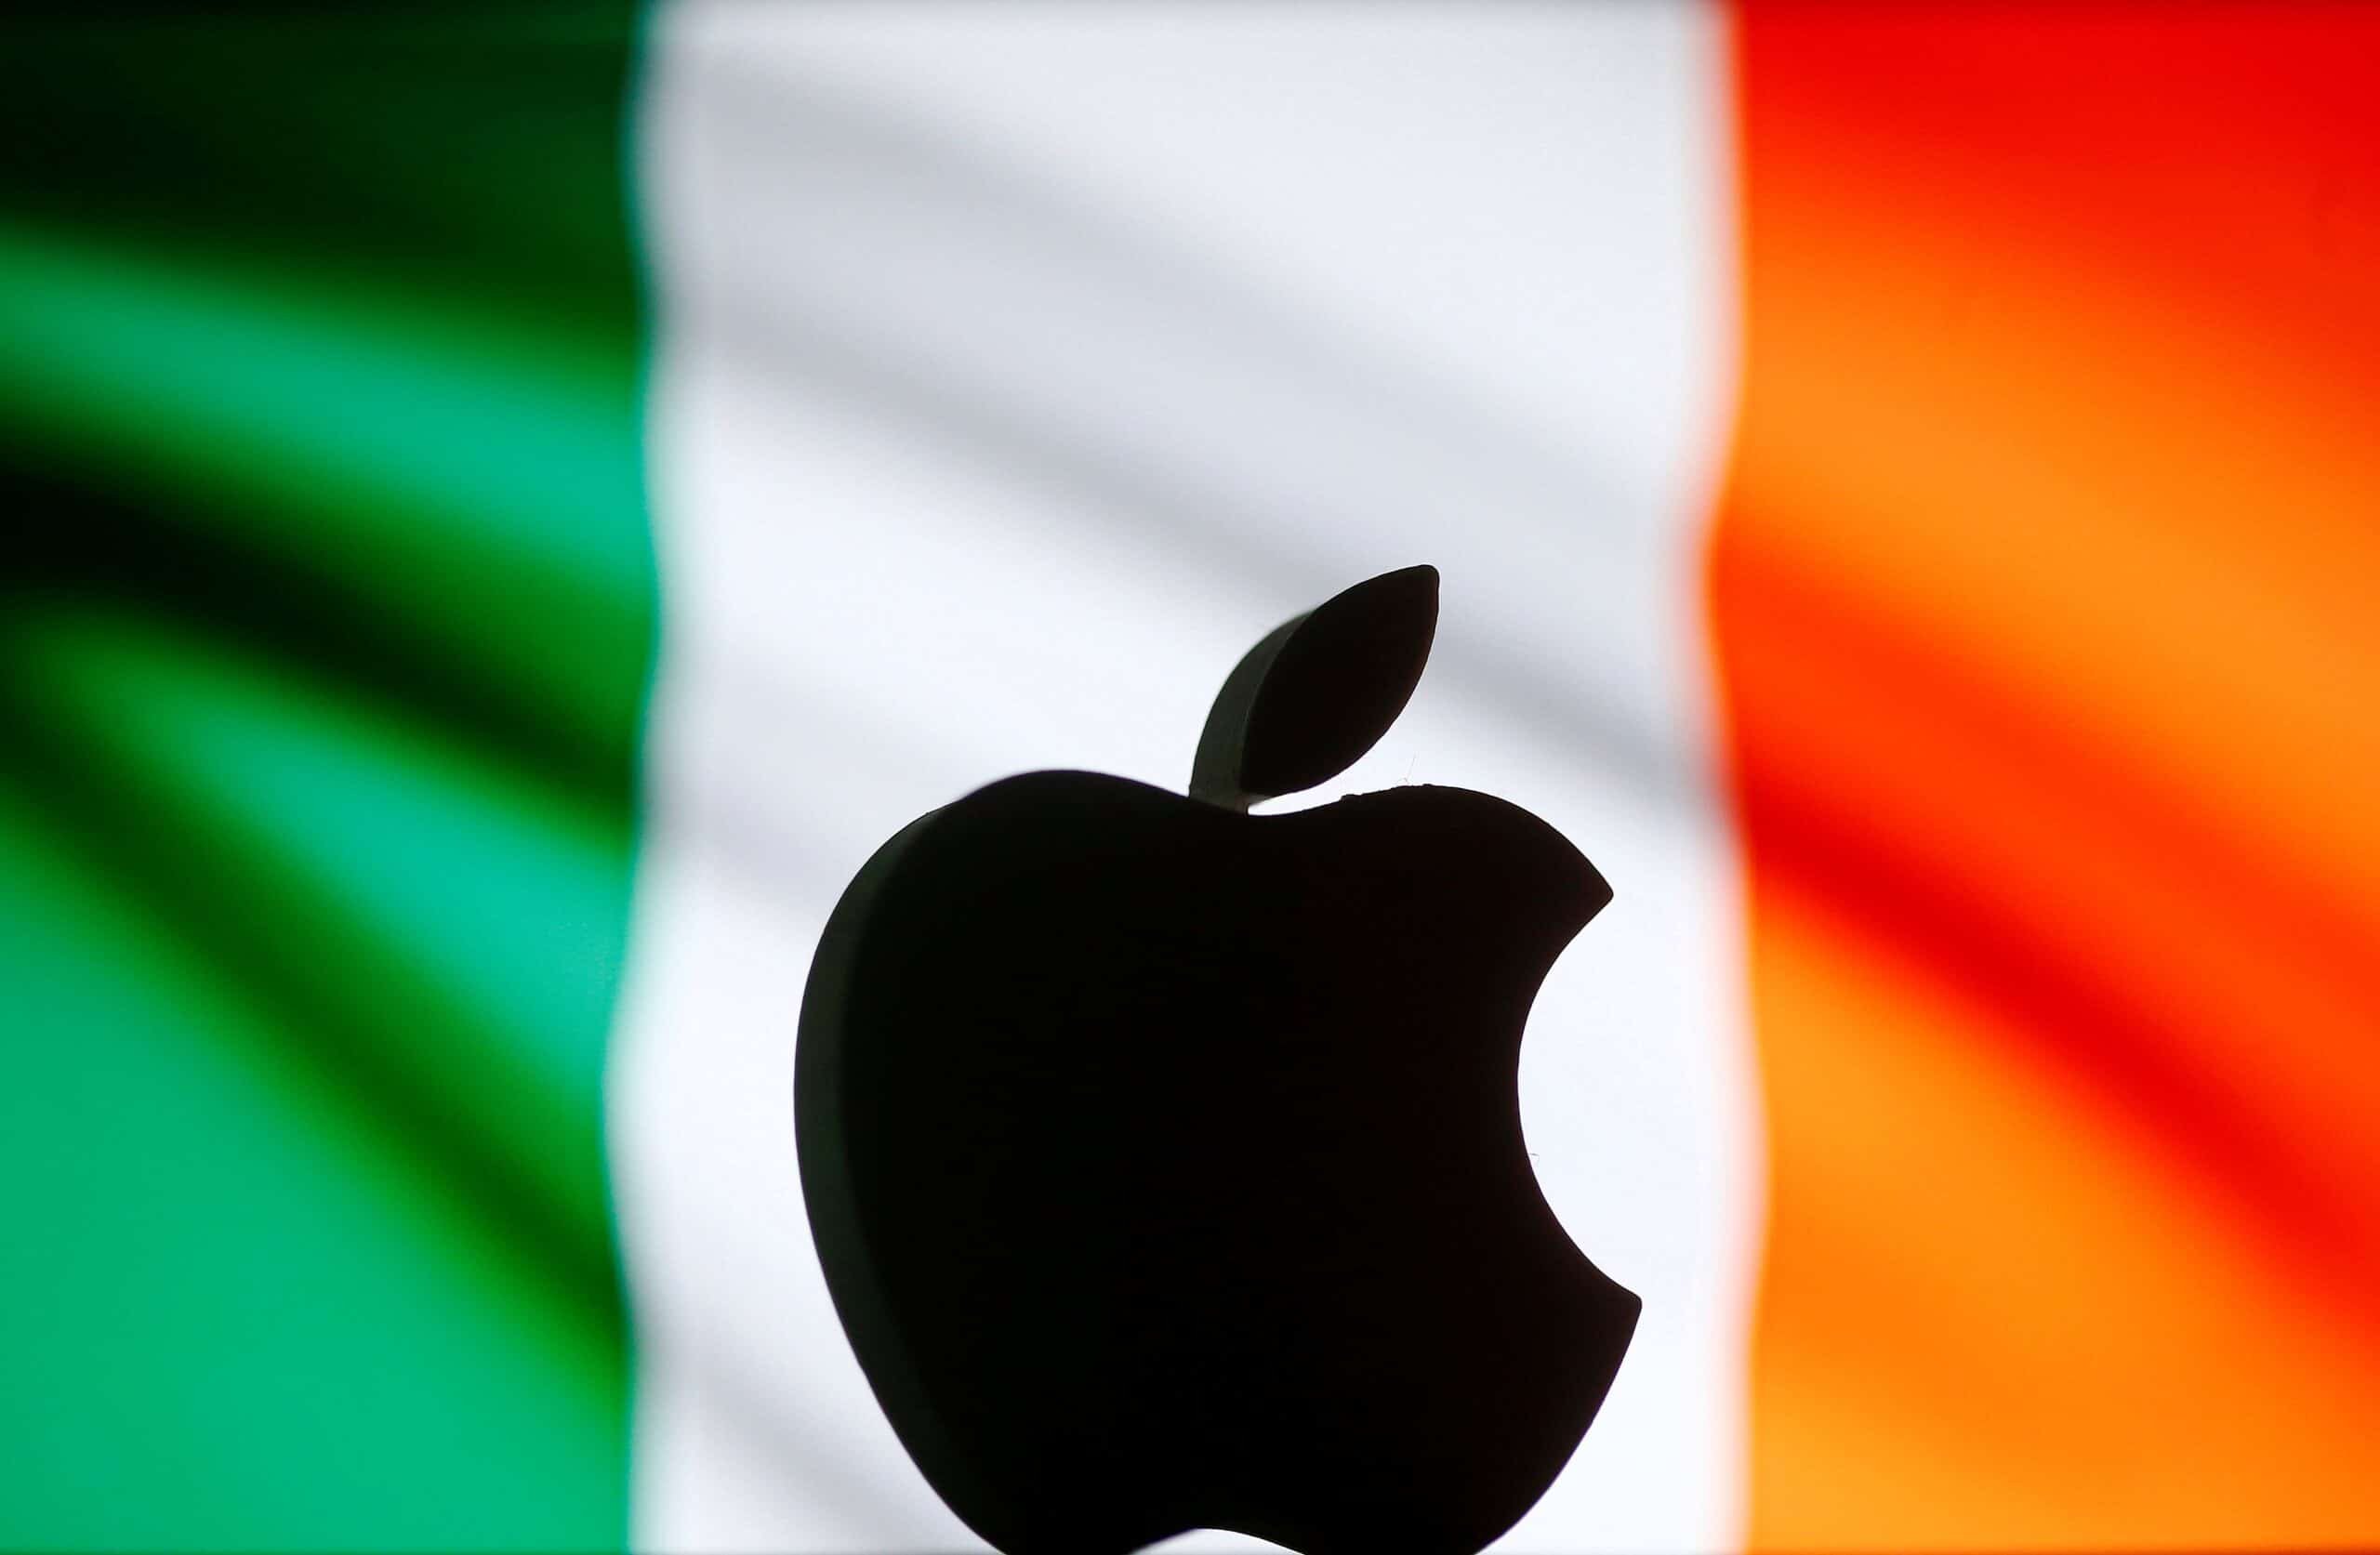 Decision that forced Apple to pay 13 billion euros in taxes to Ireland is overturned